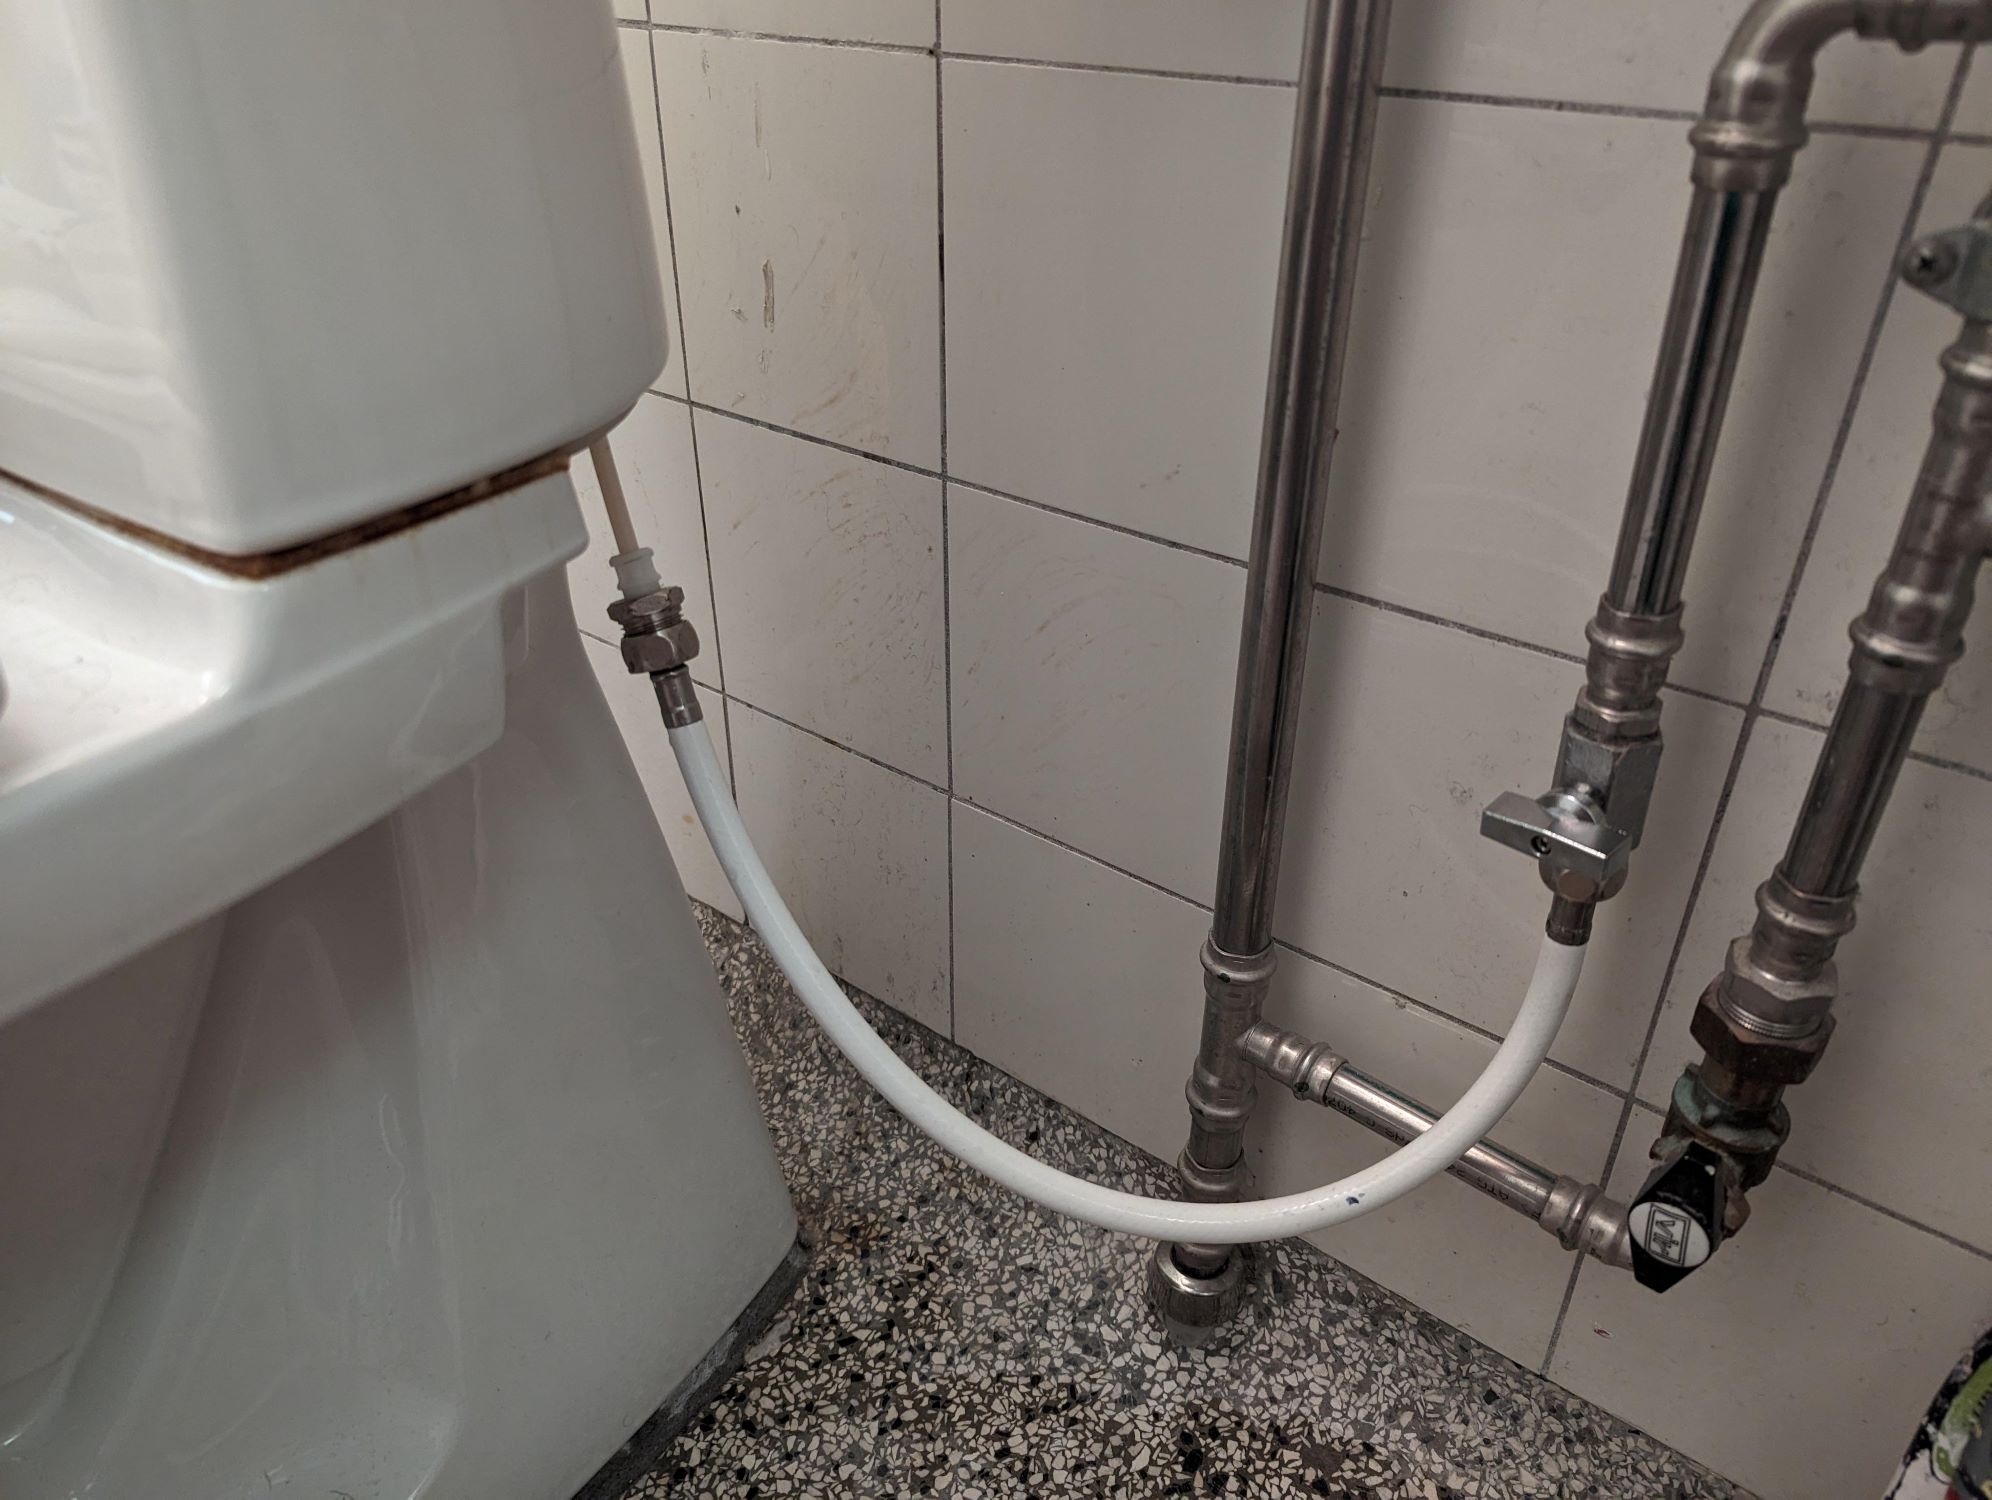 How To Install A Handheld Bidet